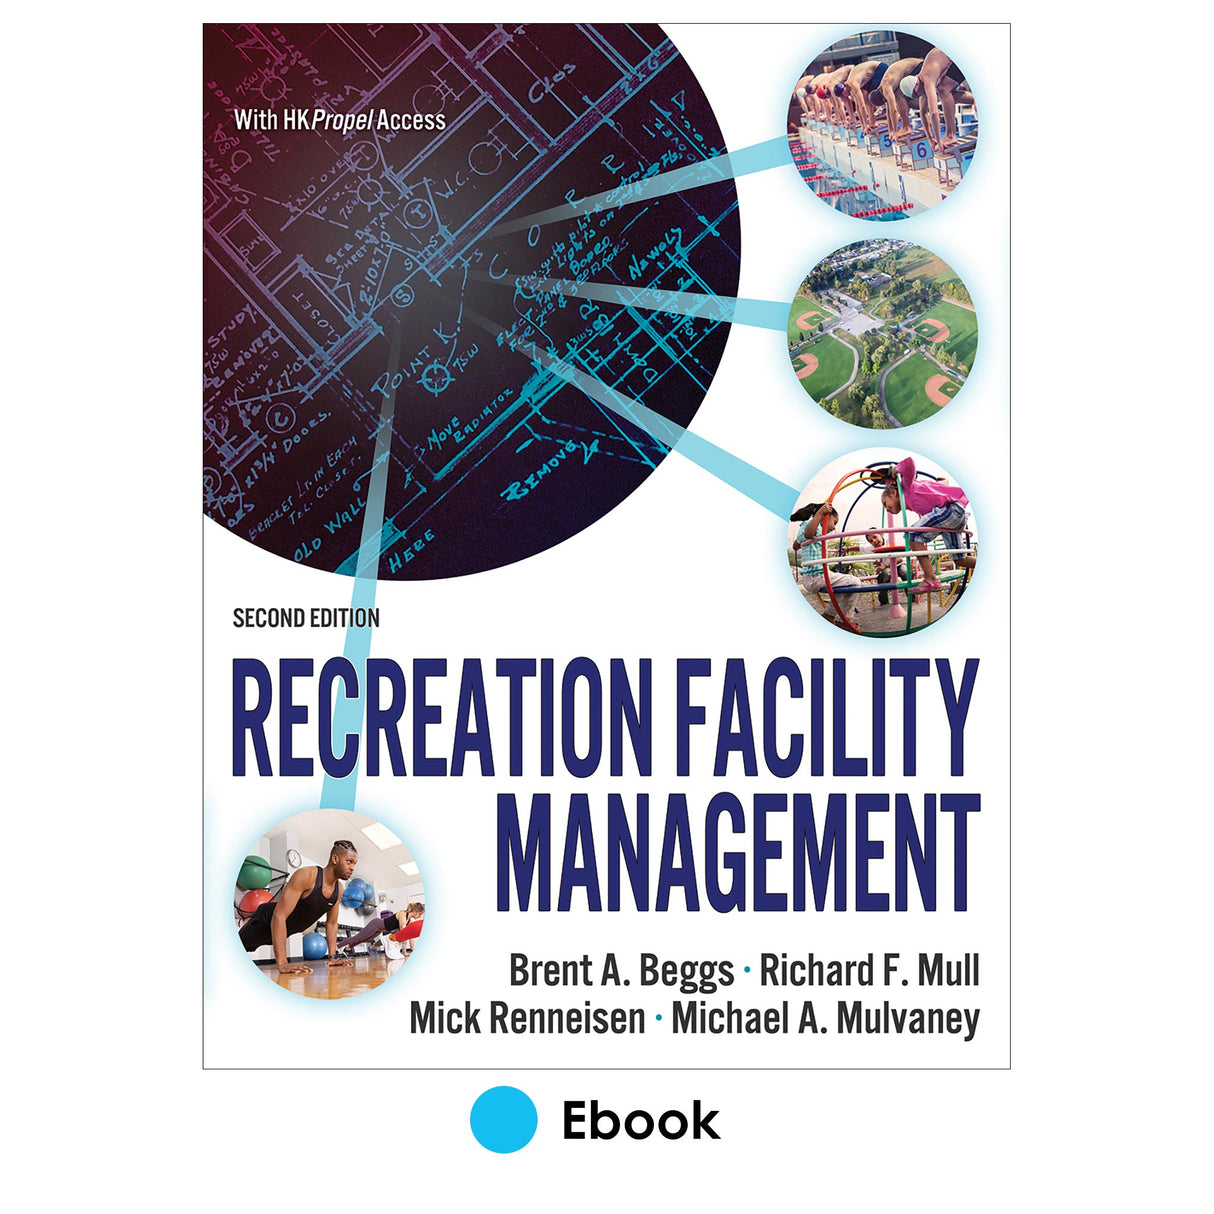 Recreation Facility Management 2nd Edition Ebook With HKPropel Access